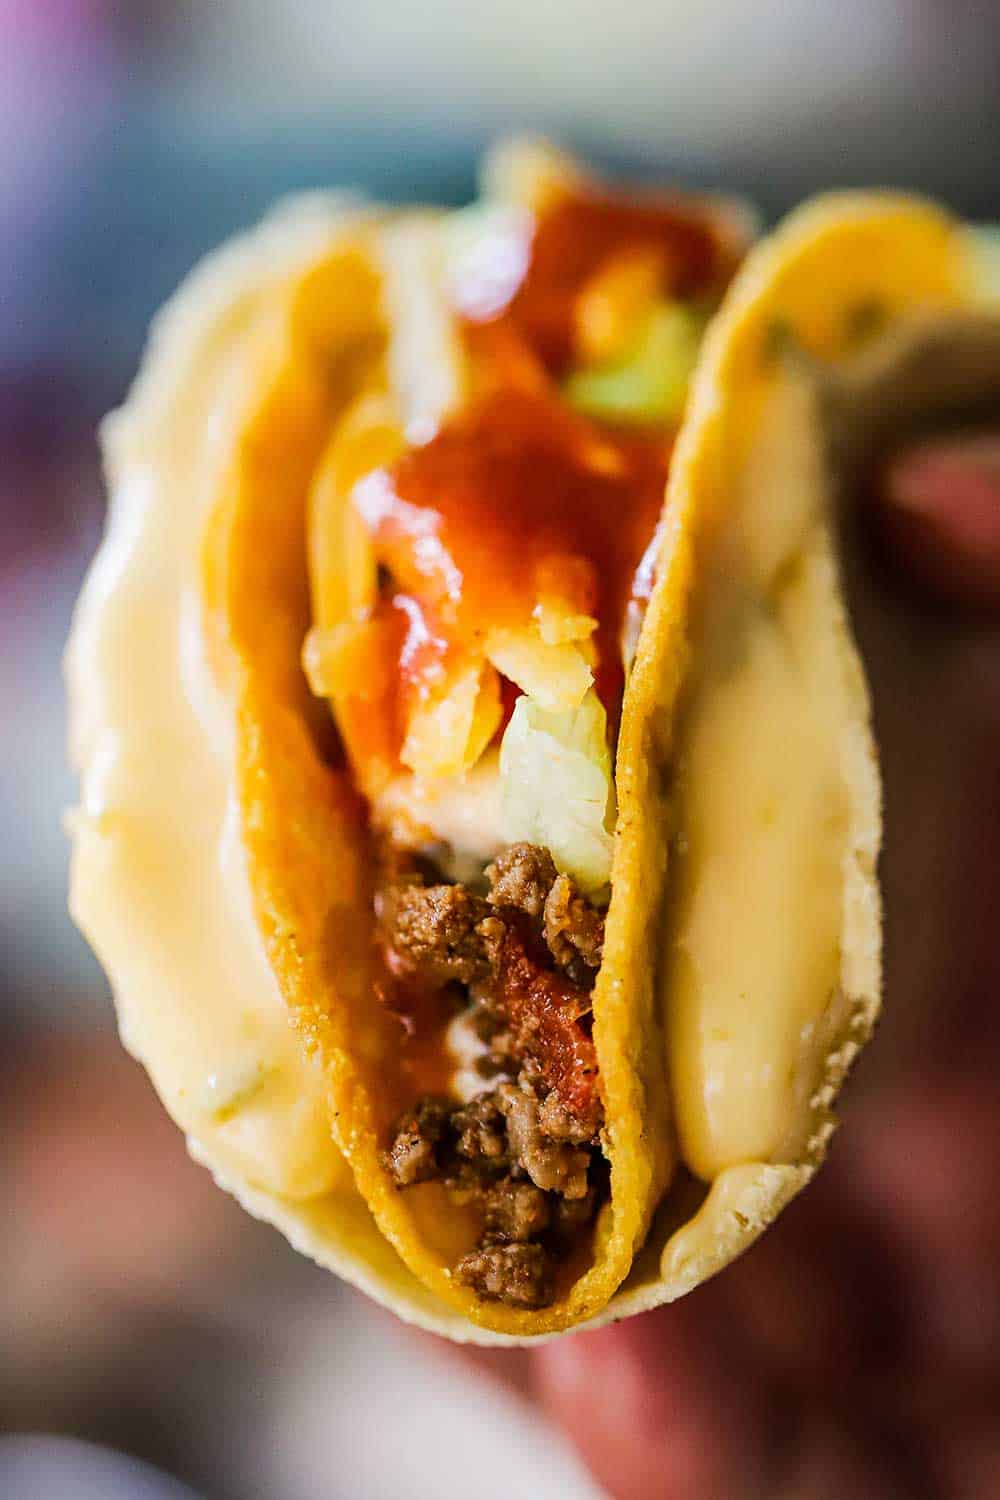 A close-up view of a crunch taco encased with a soft tortilla lined with a cheese sauce.